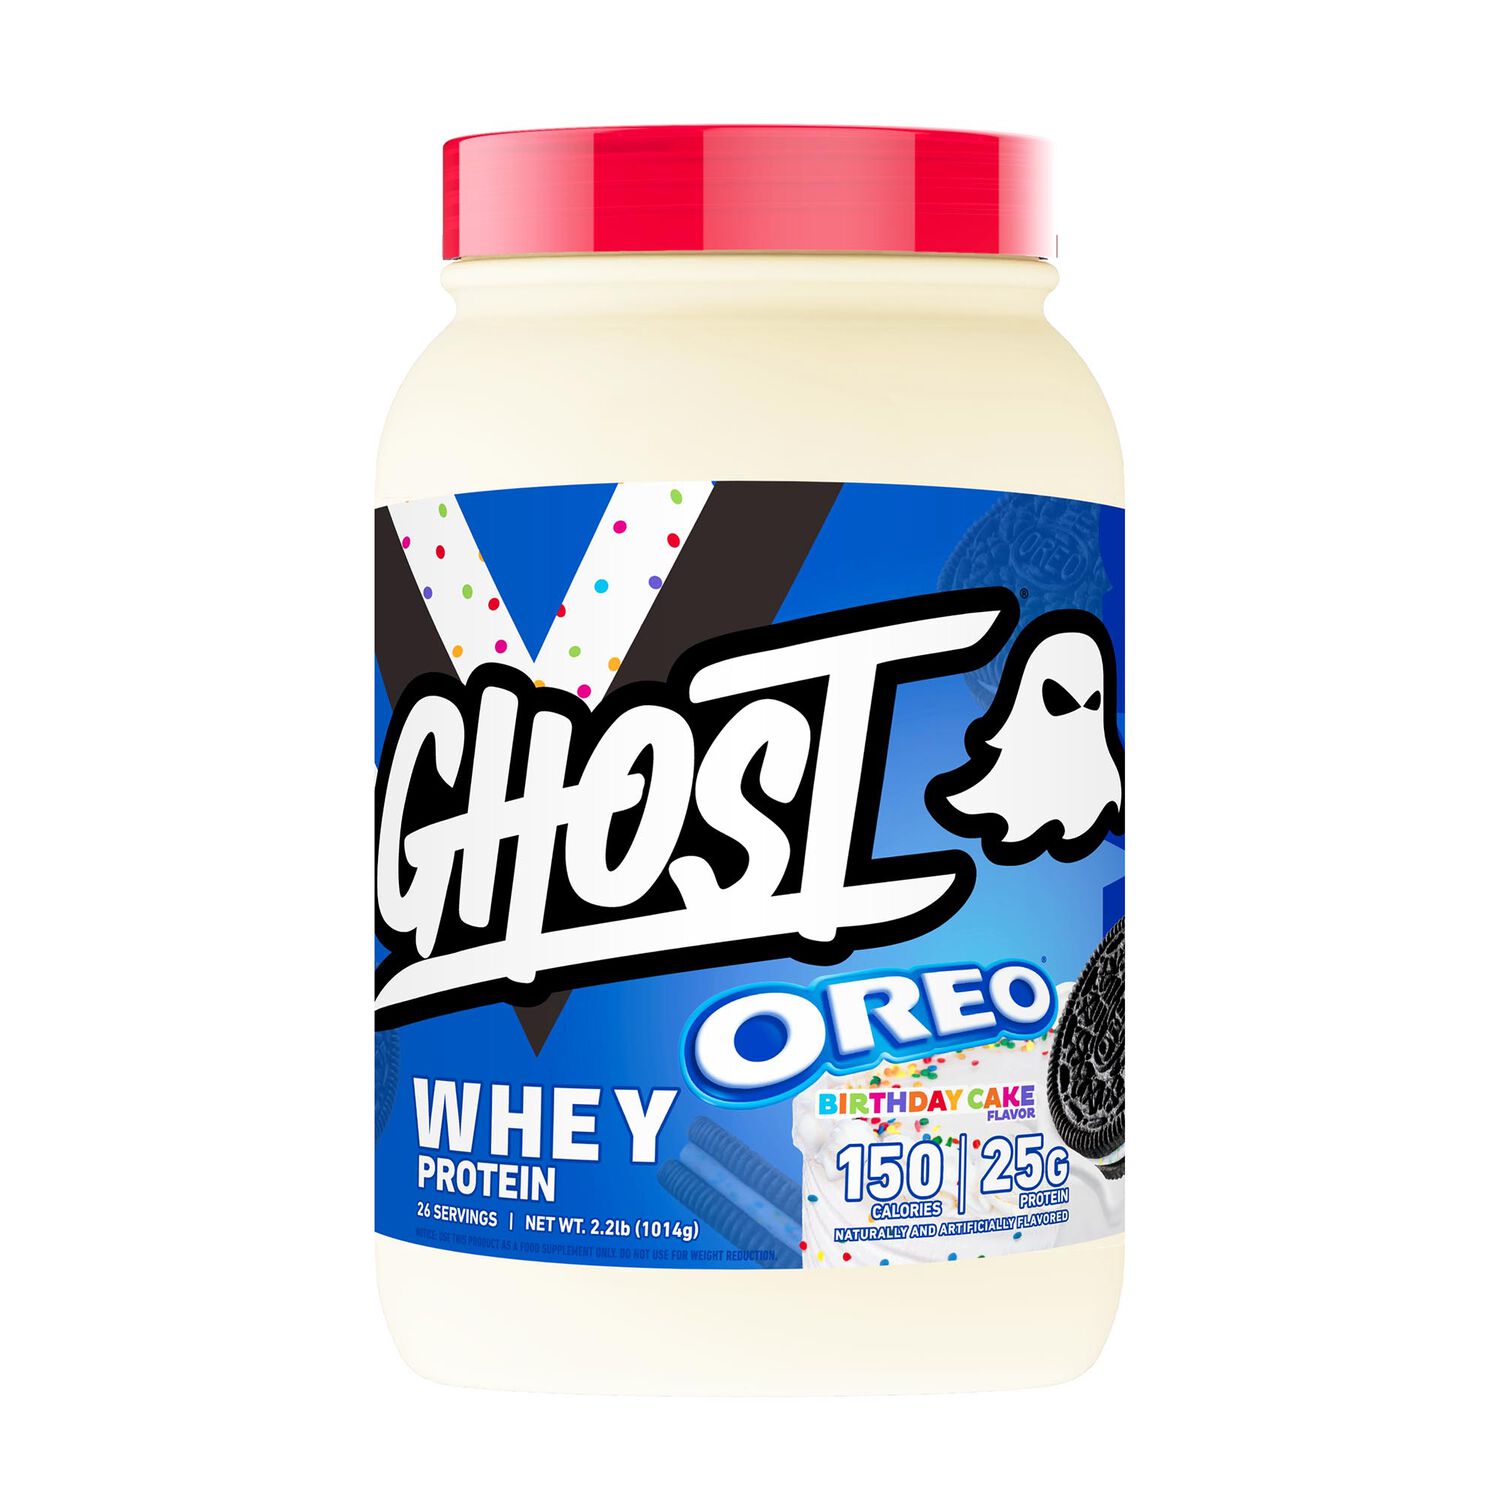 Ghost Lifestyle Whey Protein x Oreo Birthday Cake-The Supplement Haven